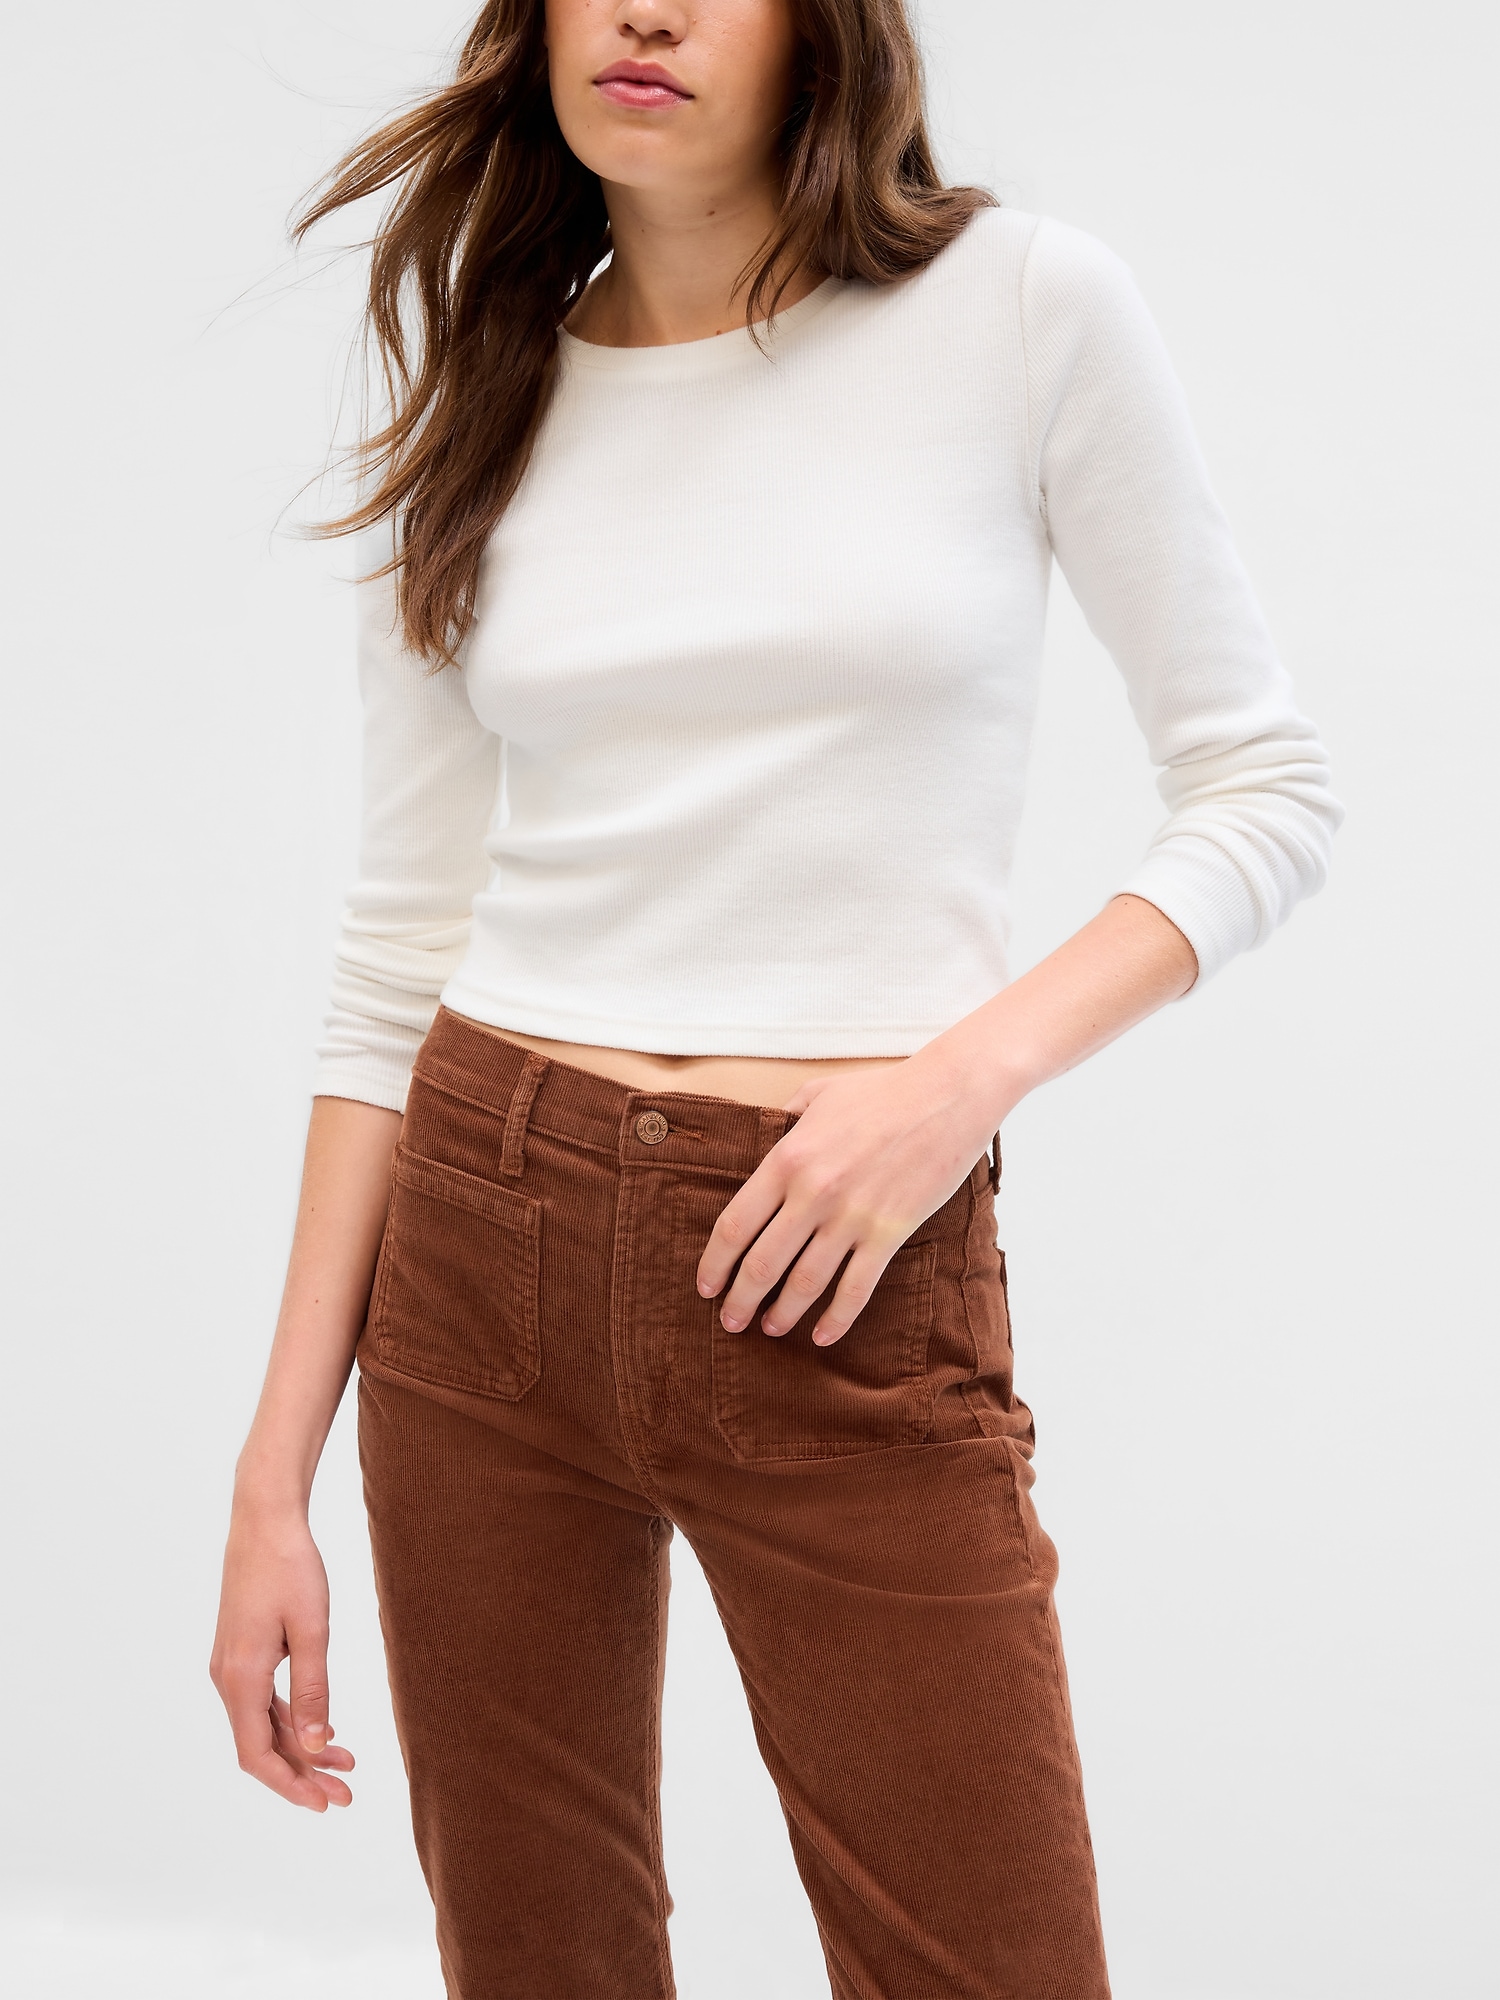 it's all FLARE #corduroy #flare #pants It's easy to combine anyting with  these Tan Corduroy Flare Pants 😍…